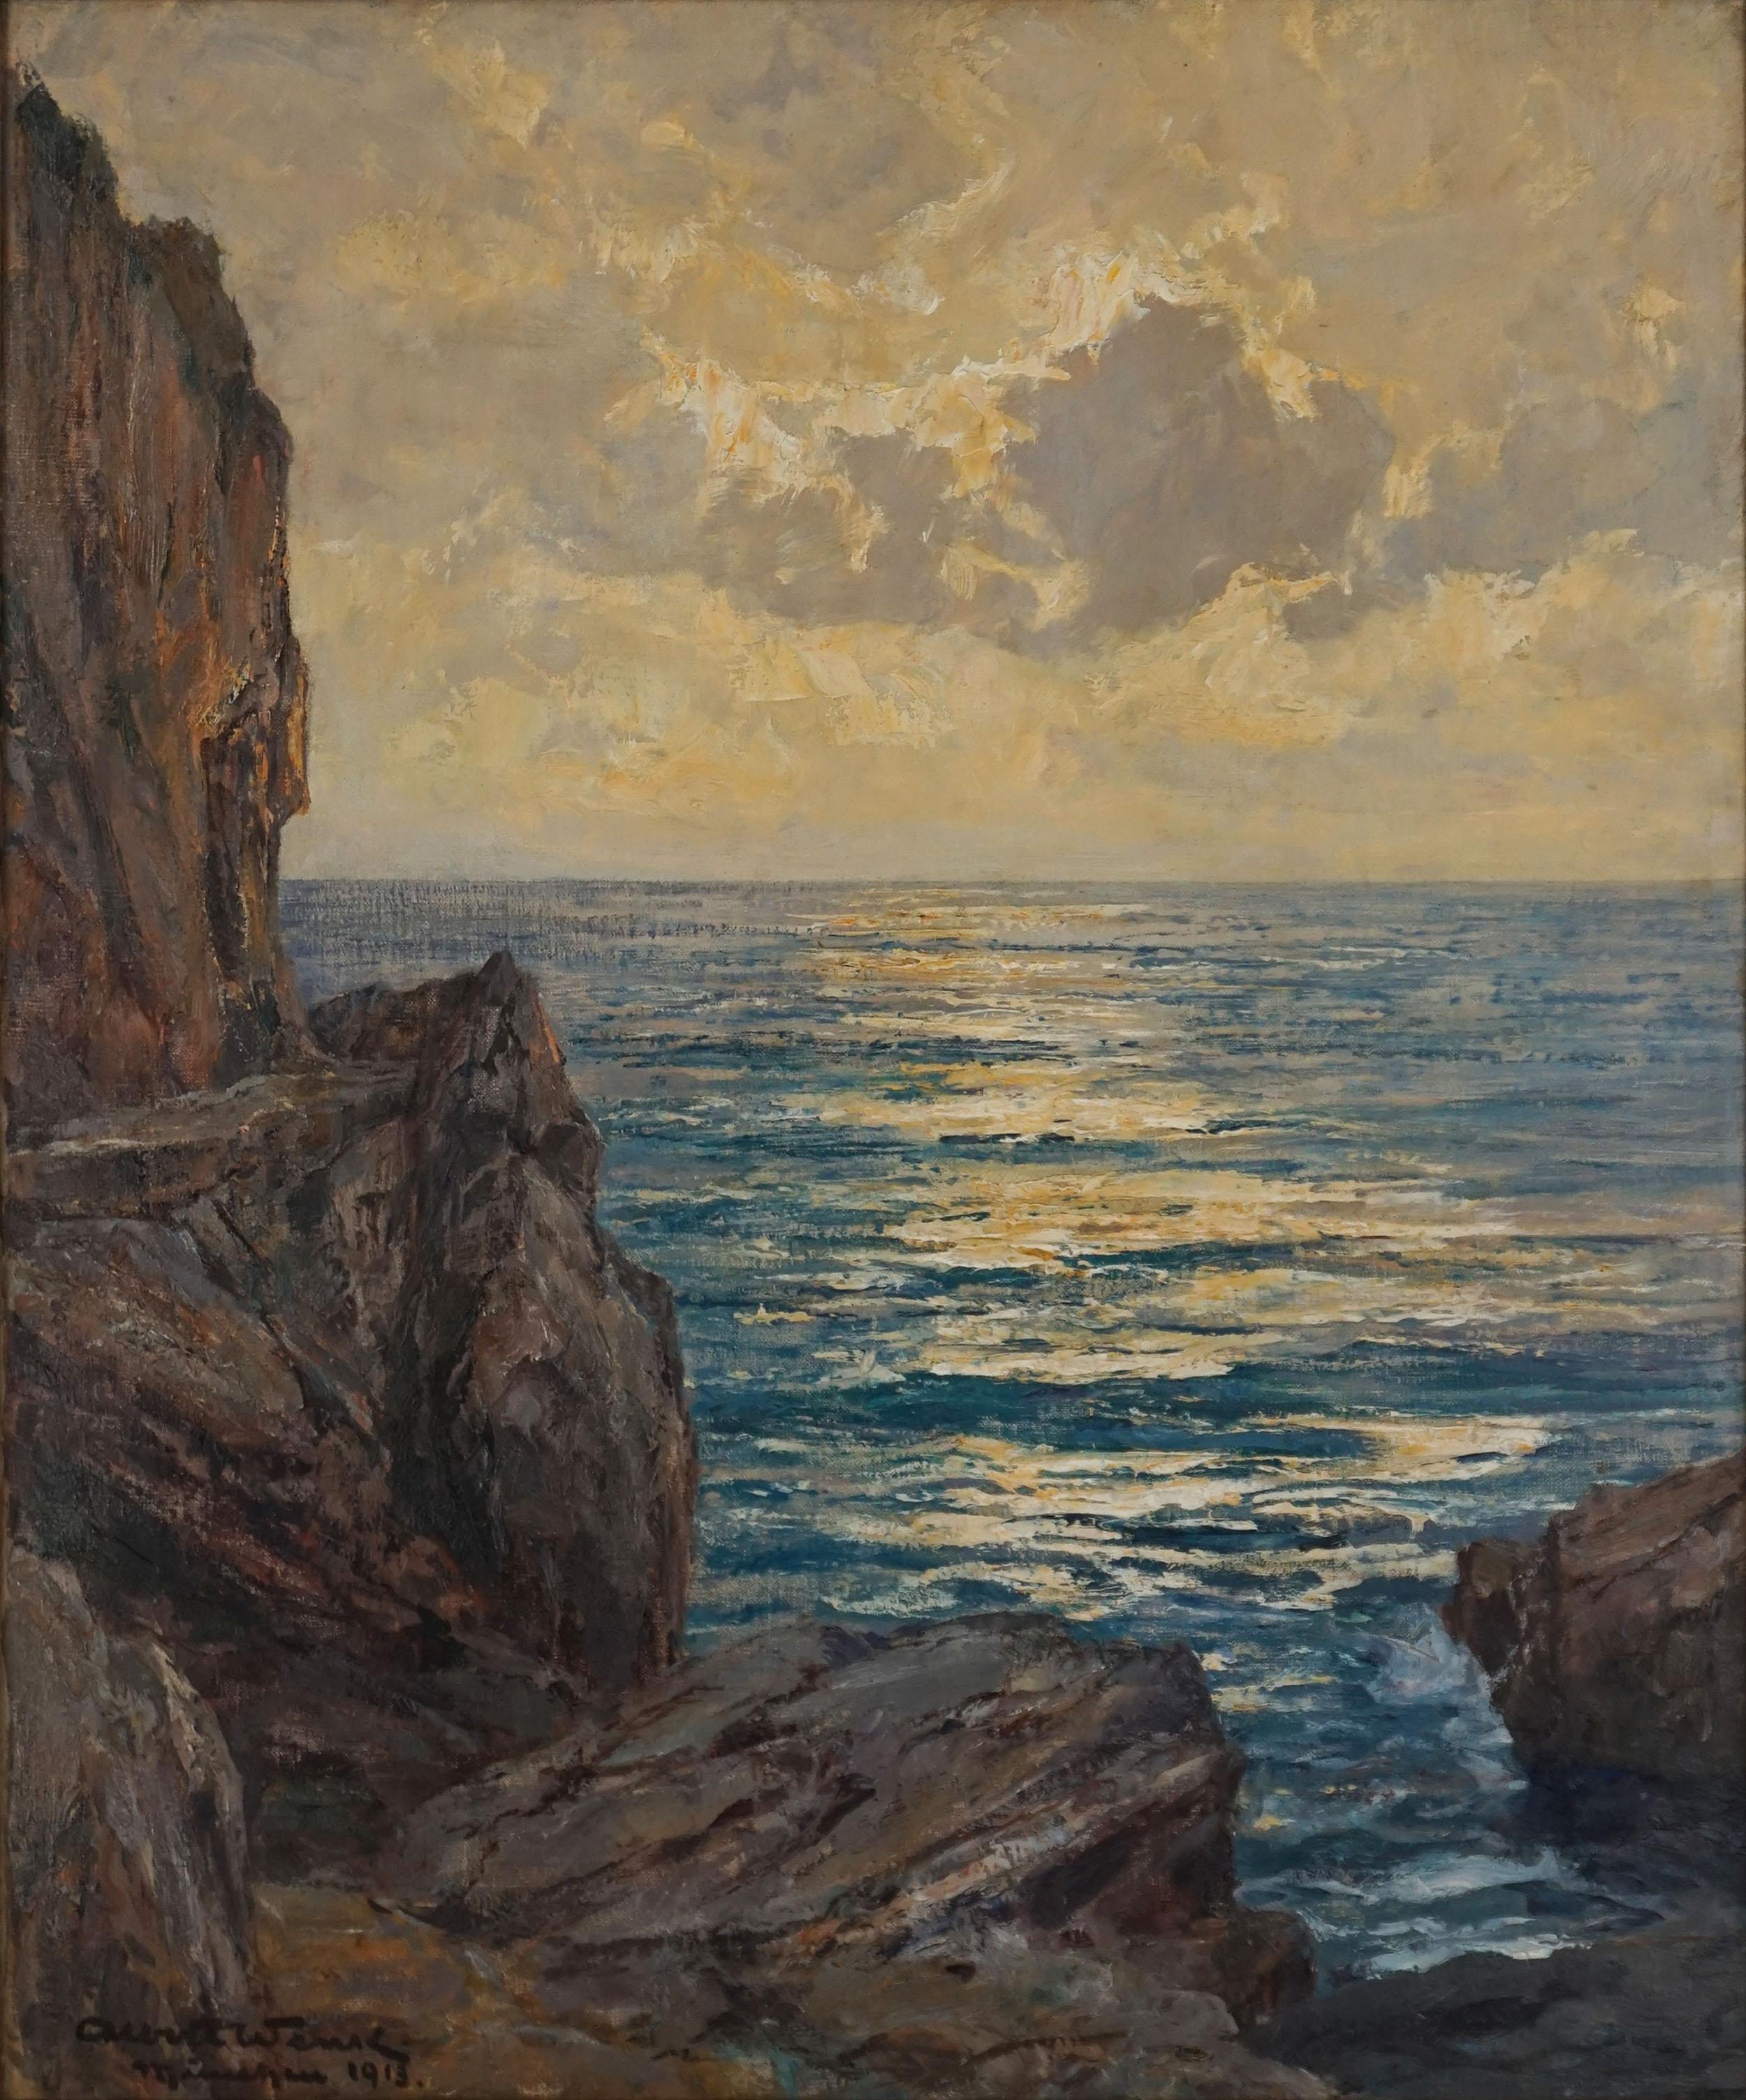 Early 20th Century Seascape of Capri, Amalfi Coast - Painting by Albert Wenk